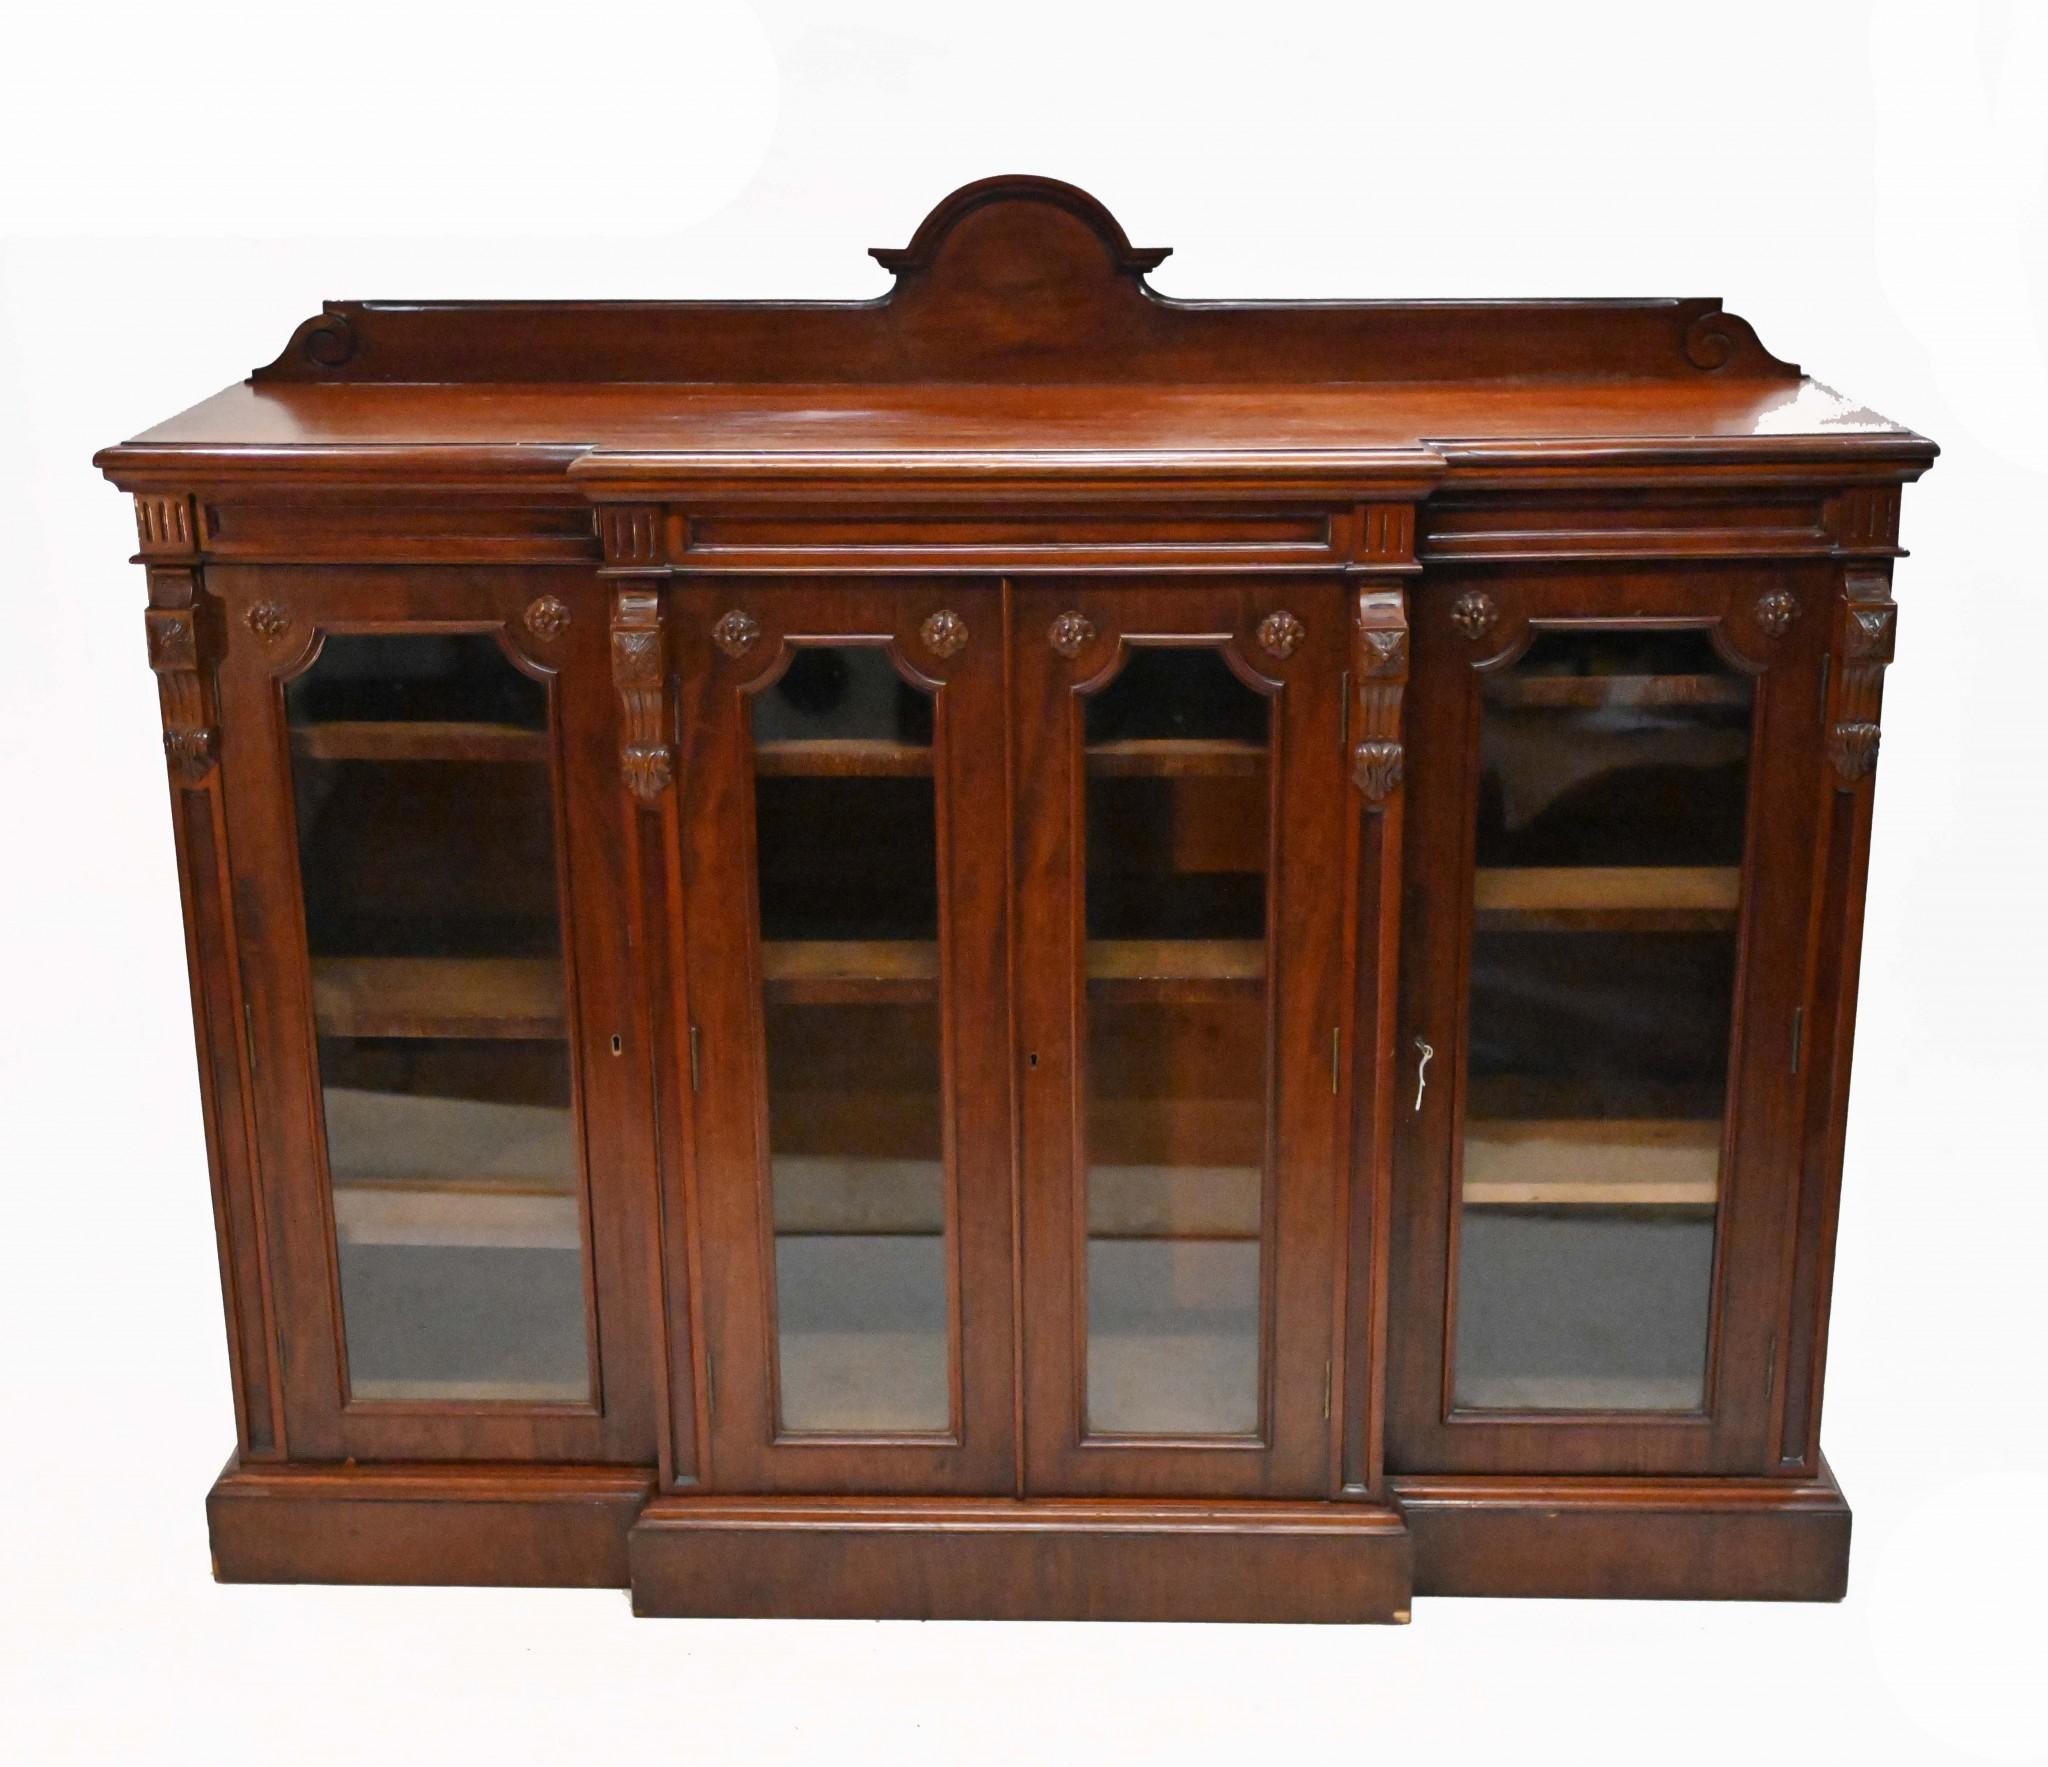 Elegant Victorian bookcase or display cabinet of chiffonier form
Circa 1880 and this has been crafted from mahogany
Plenty of storage with four glass fronted doors
Bought from a private residence in London's Belgravia
Viewings available by